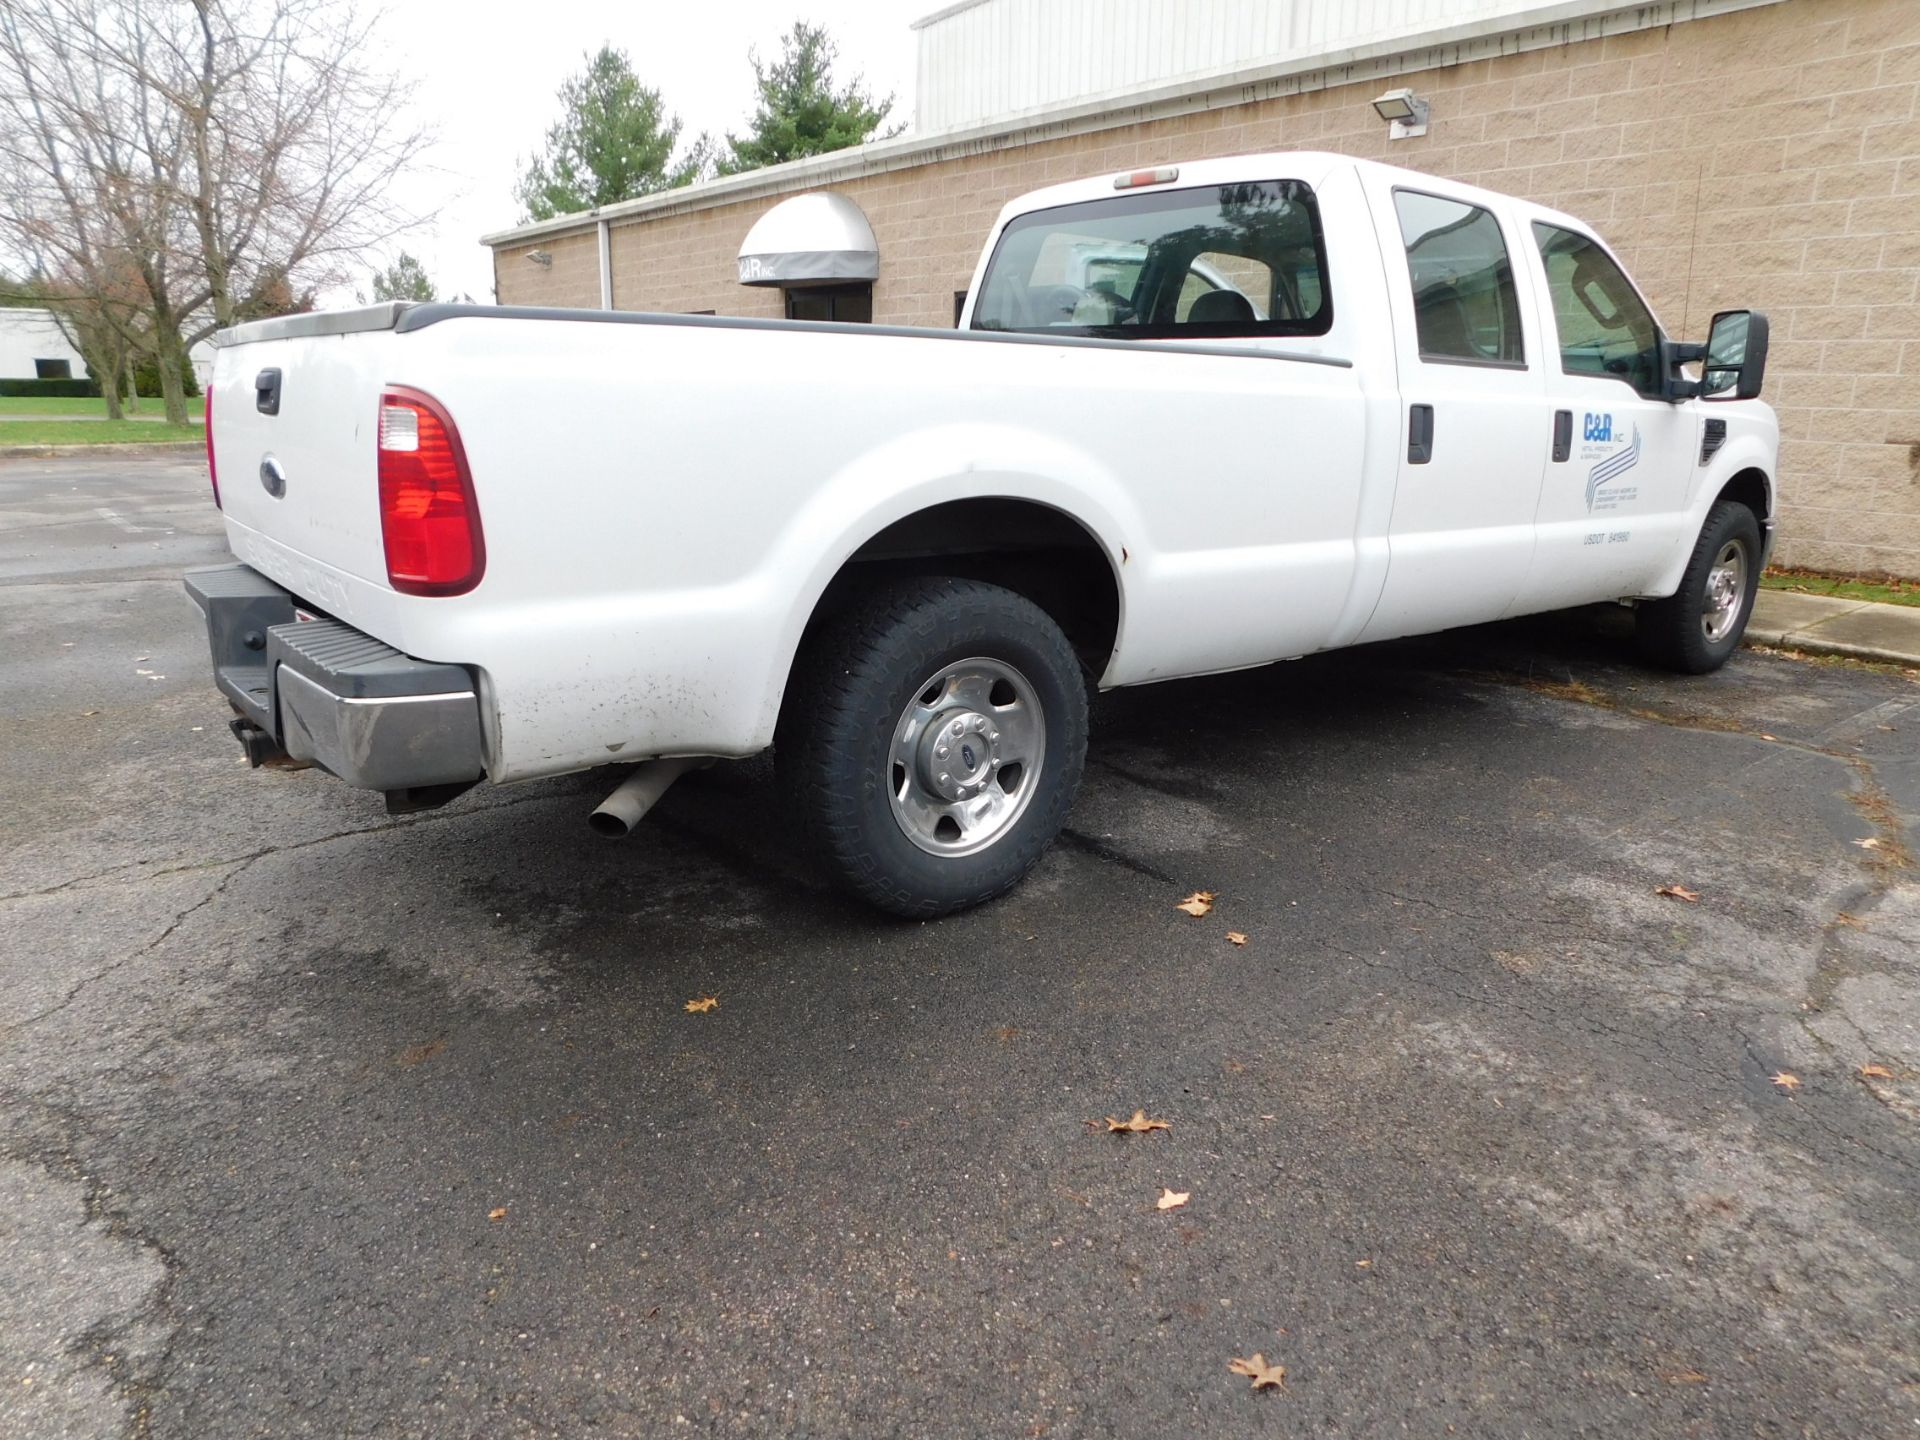 2008 Ford F250XL Super Duty Pick Up Truck, VIN 1FTSW20548EB51209, Crew Cab, Automatic, 8' Bed, 190, - Image 4 of 36